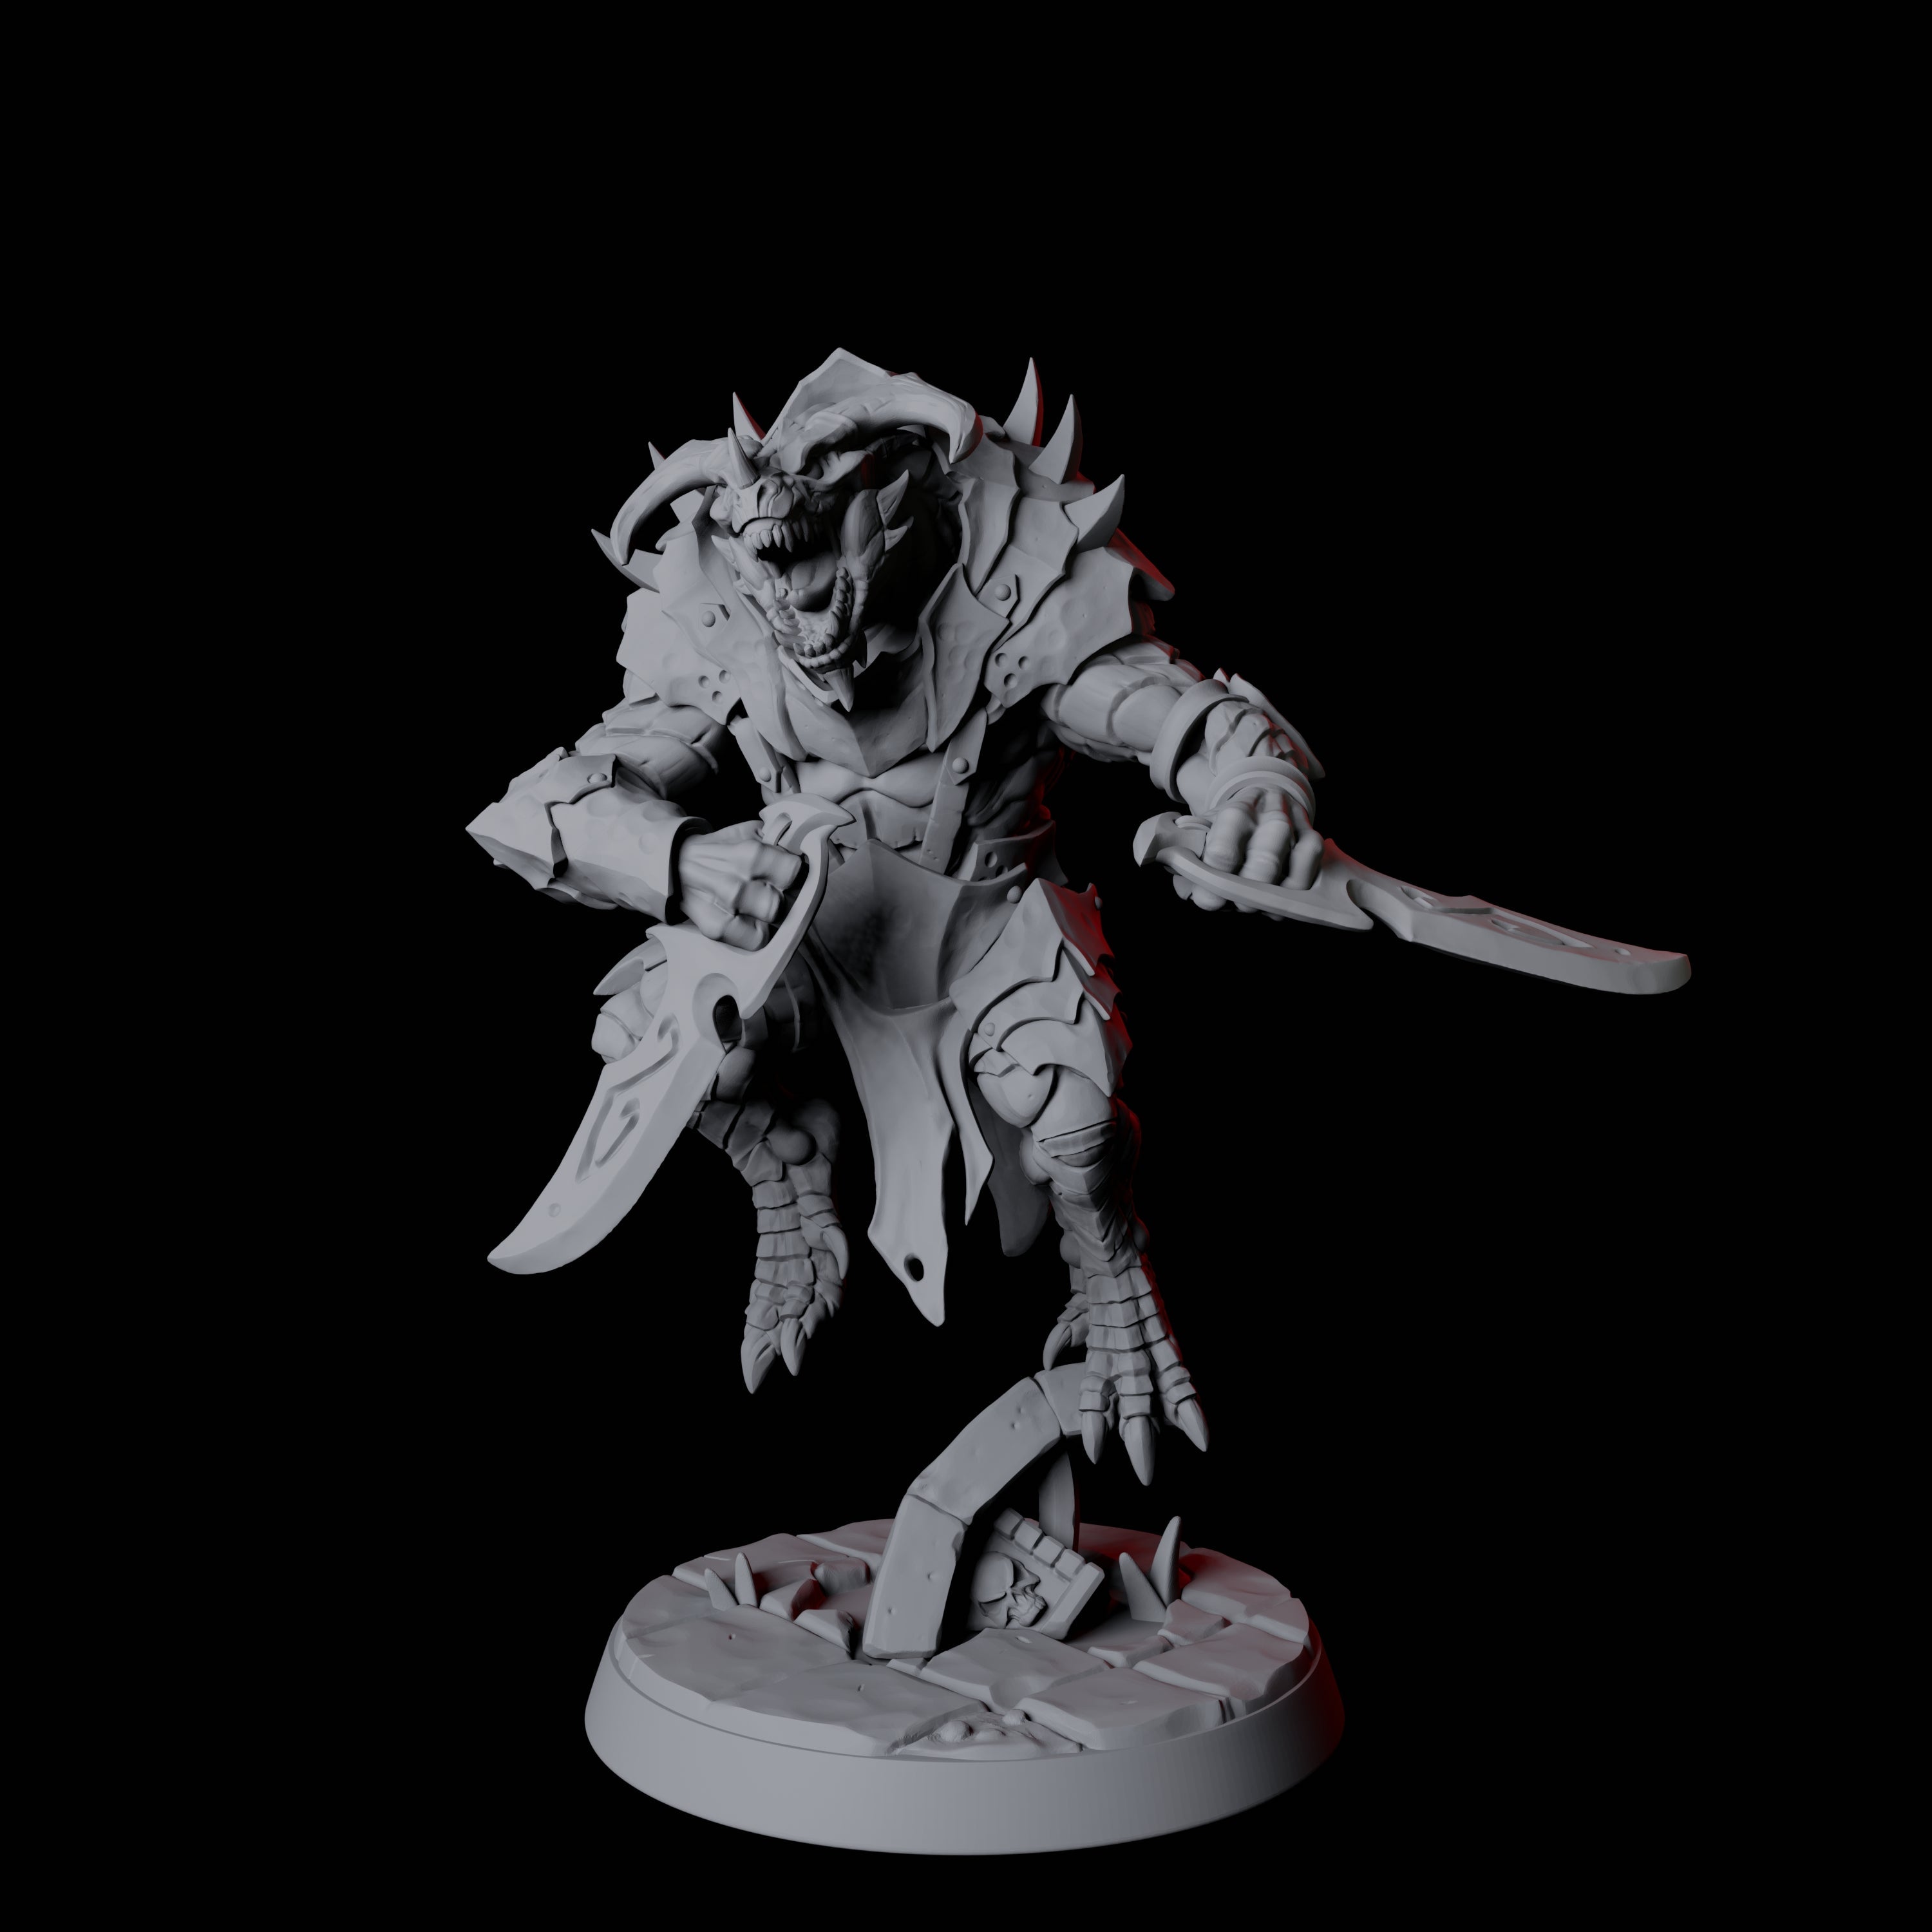 Dauntless Dragonborn Fighter E Miniature for Dungeons and Dragons, Pathfinder or other TTRPGs